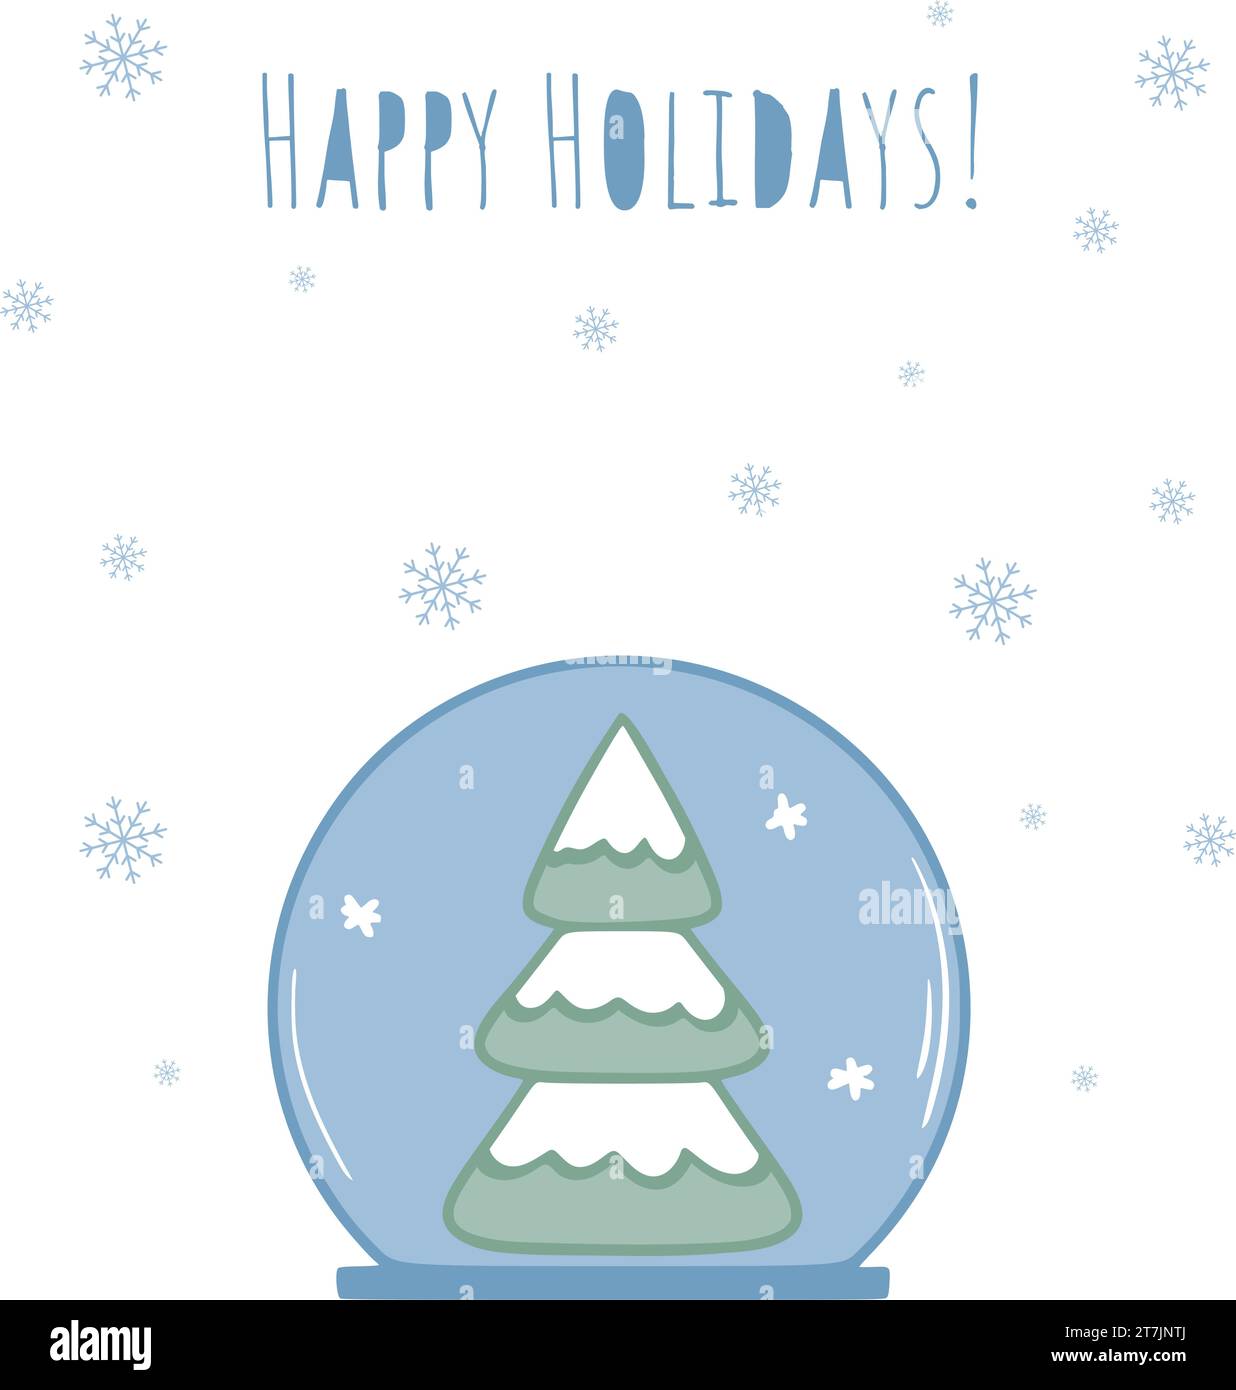 Christmas card with Christmas tree. Happy holidays lettering. Glass ball with Christmas tree. Cute holiday design, vector illustration Stock Vector